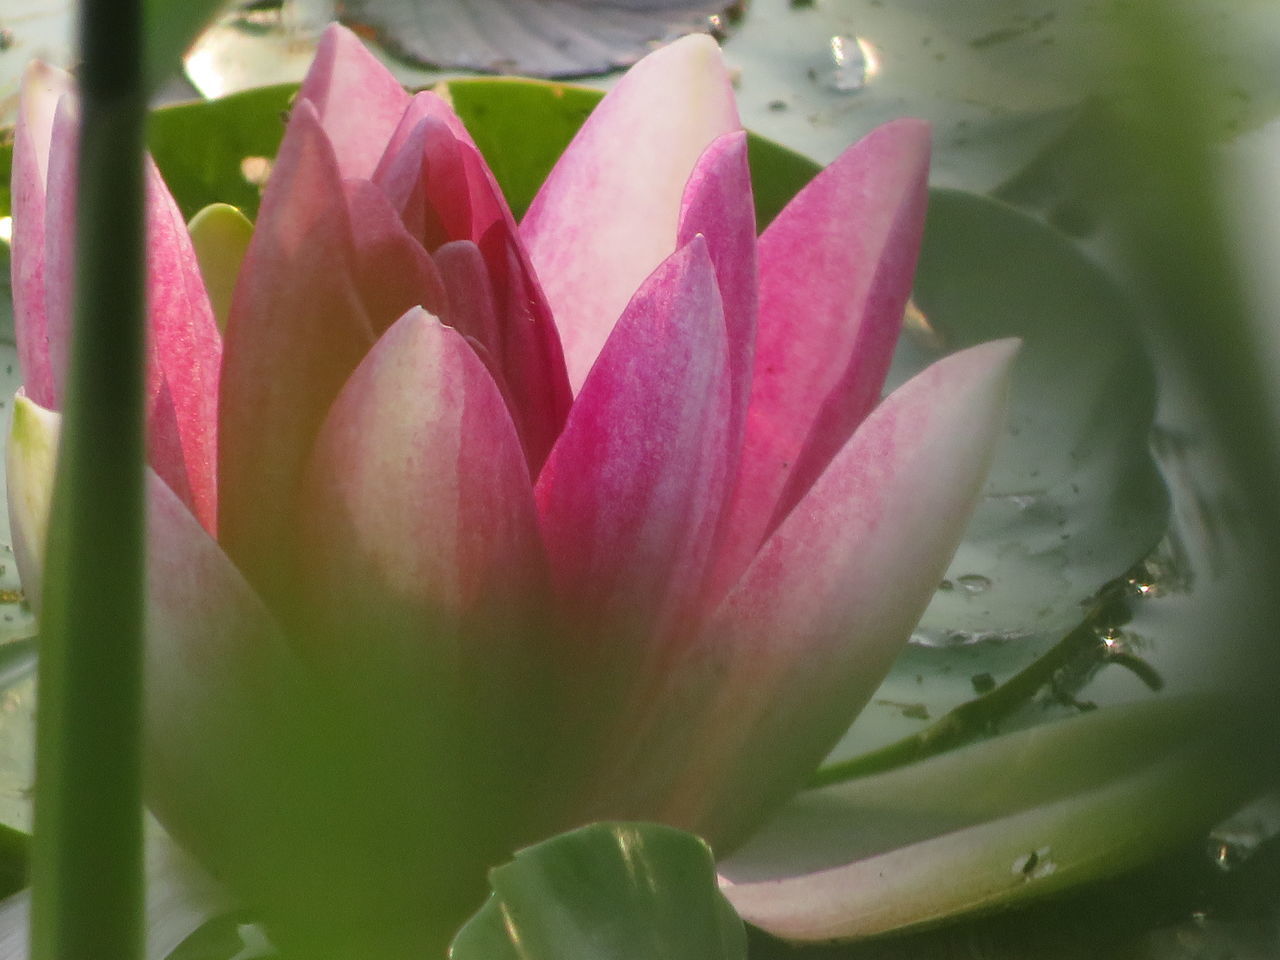 flower, flowering plant, plant, freshness, beauty in nature, pink, close-up, petal, nature, leaf, water, plant part, growth, inflorescence, fragility, water lily, flower head, no people, aquatic plant, macro photography, green, plant stem, lily, pond, drop, outdoors, lotus water lily, blossom, springtime, proteales, botany